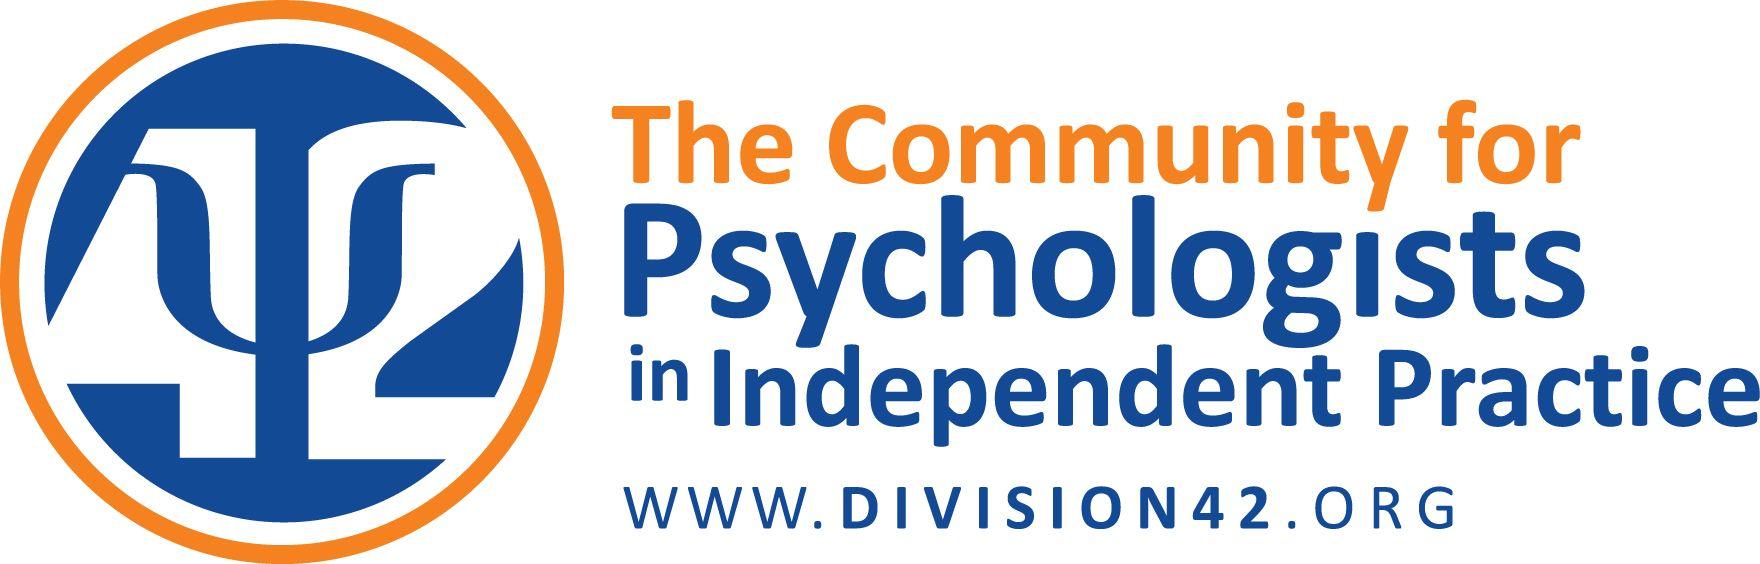 Apa.org Logo - APA Division 42 Psychologists in Independent Practice |